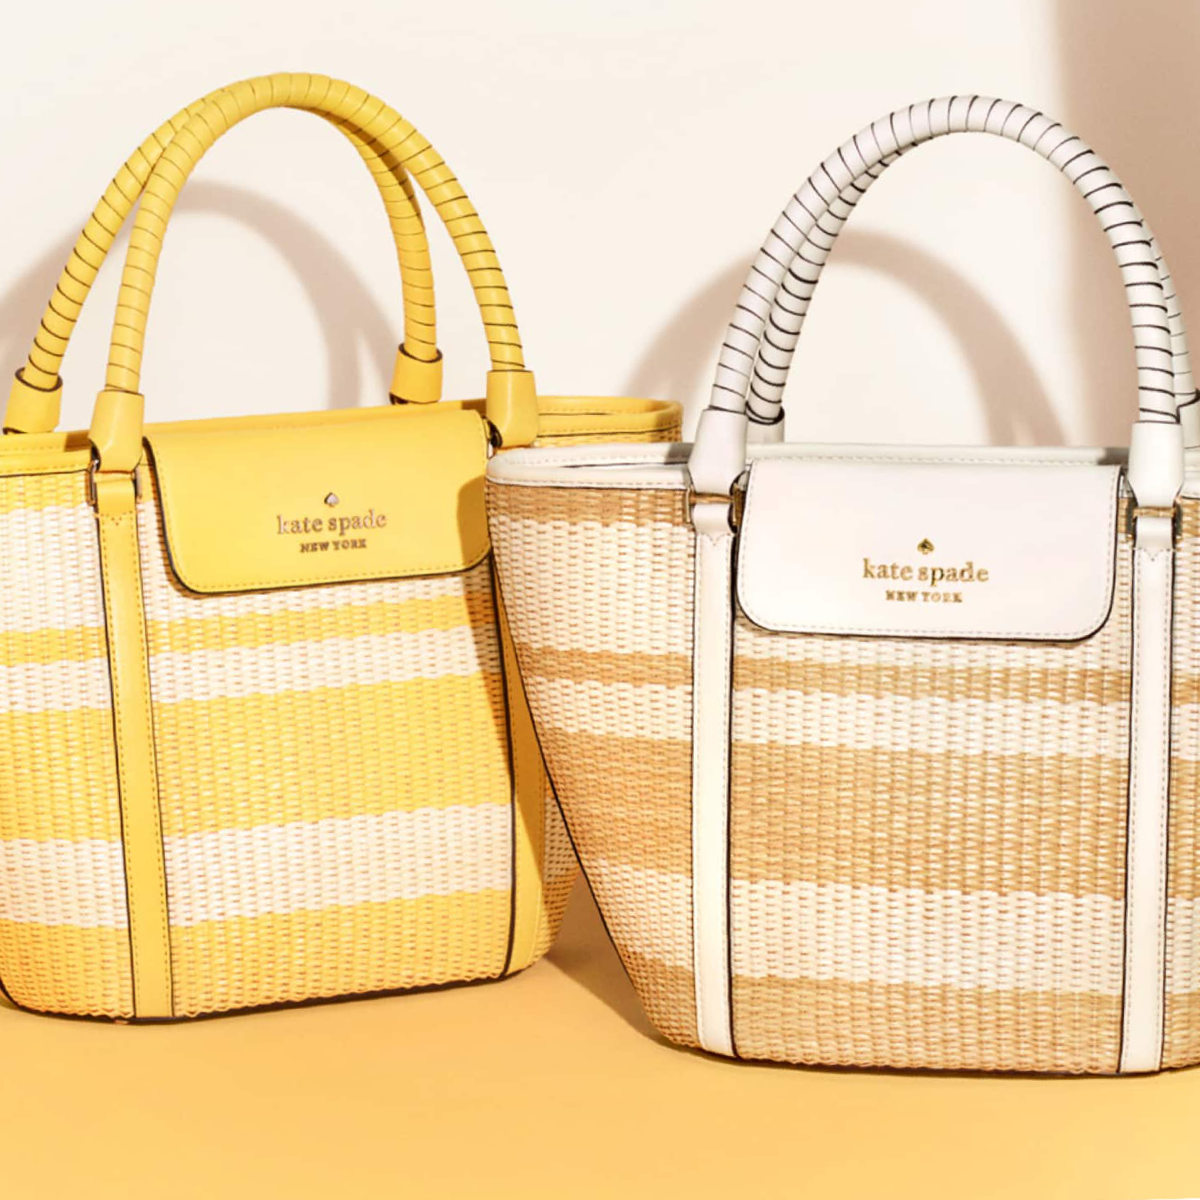 Kate Spade Surprise 1-Day Sale: $5 Deals & An Extra 20% Off Everything